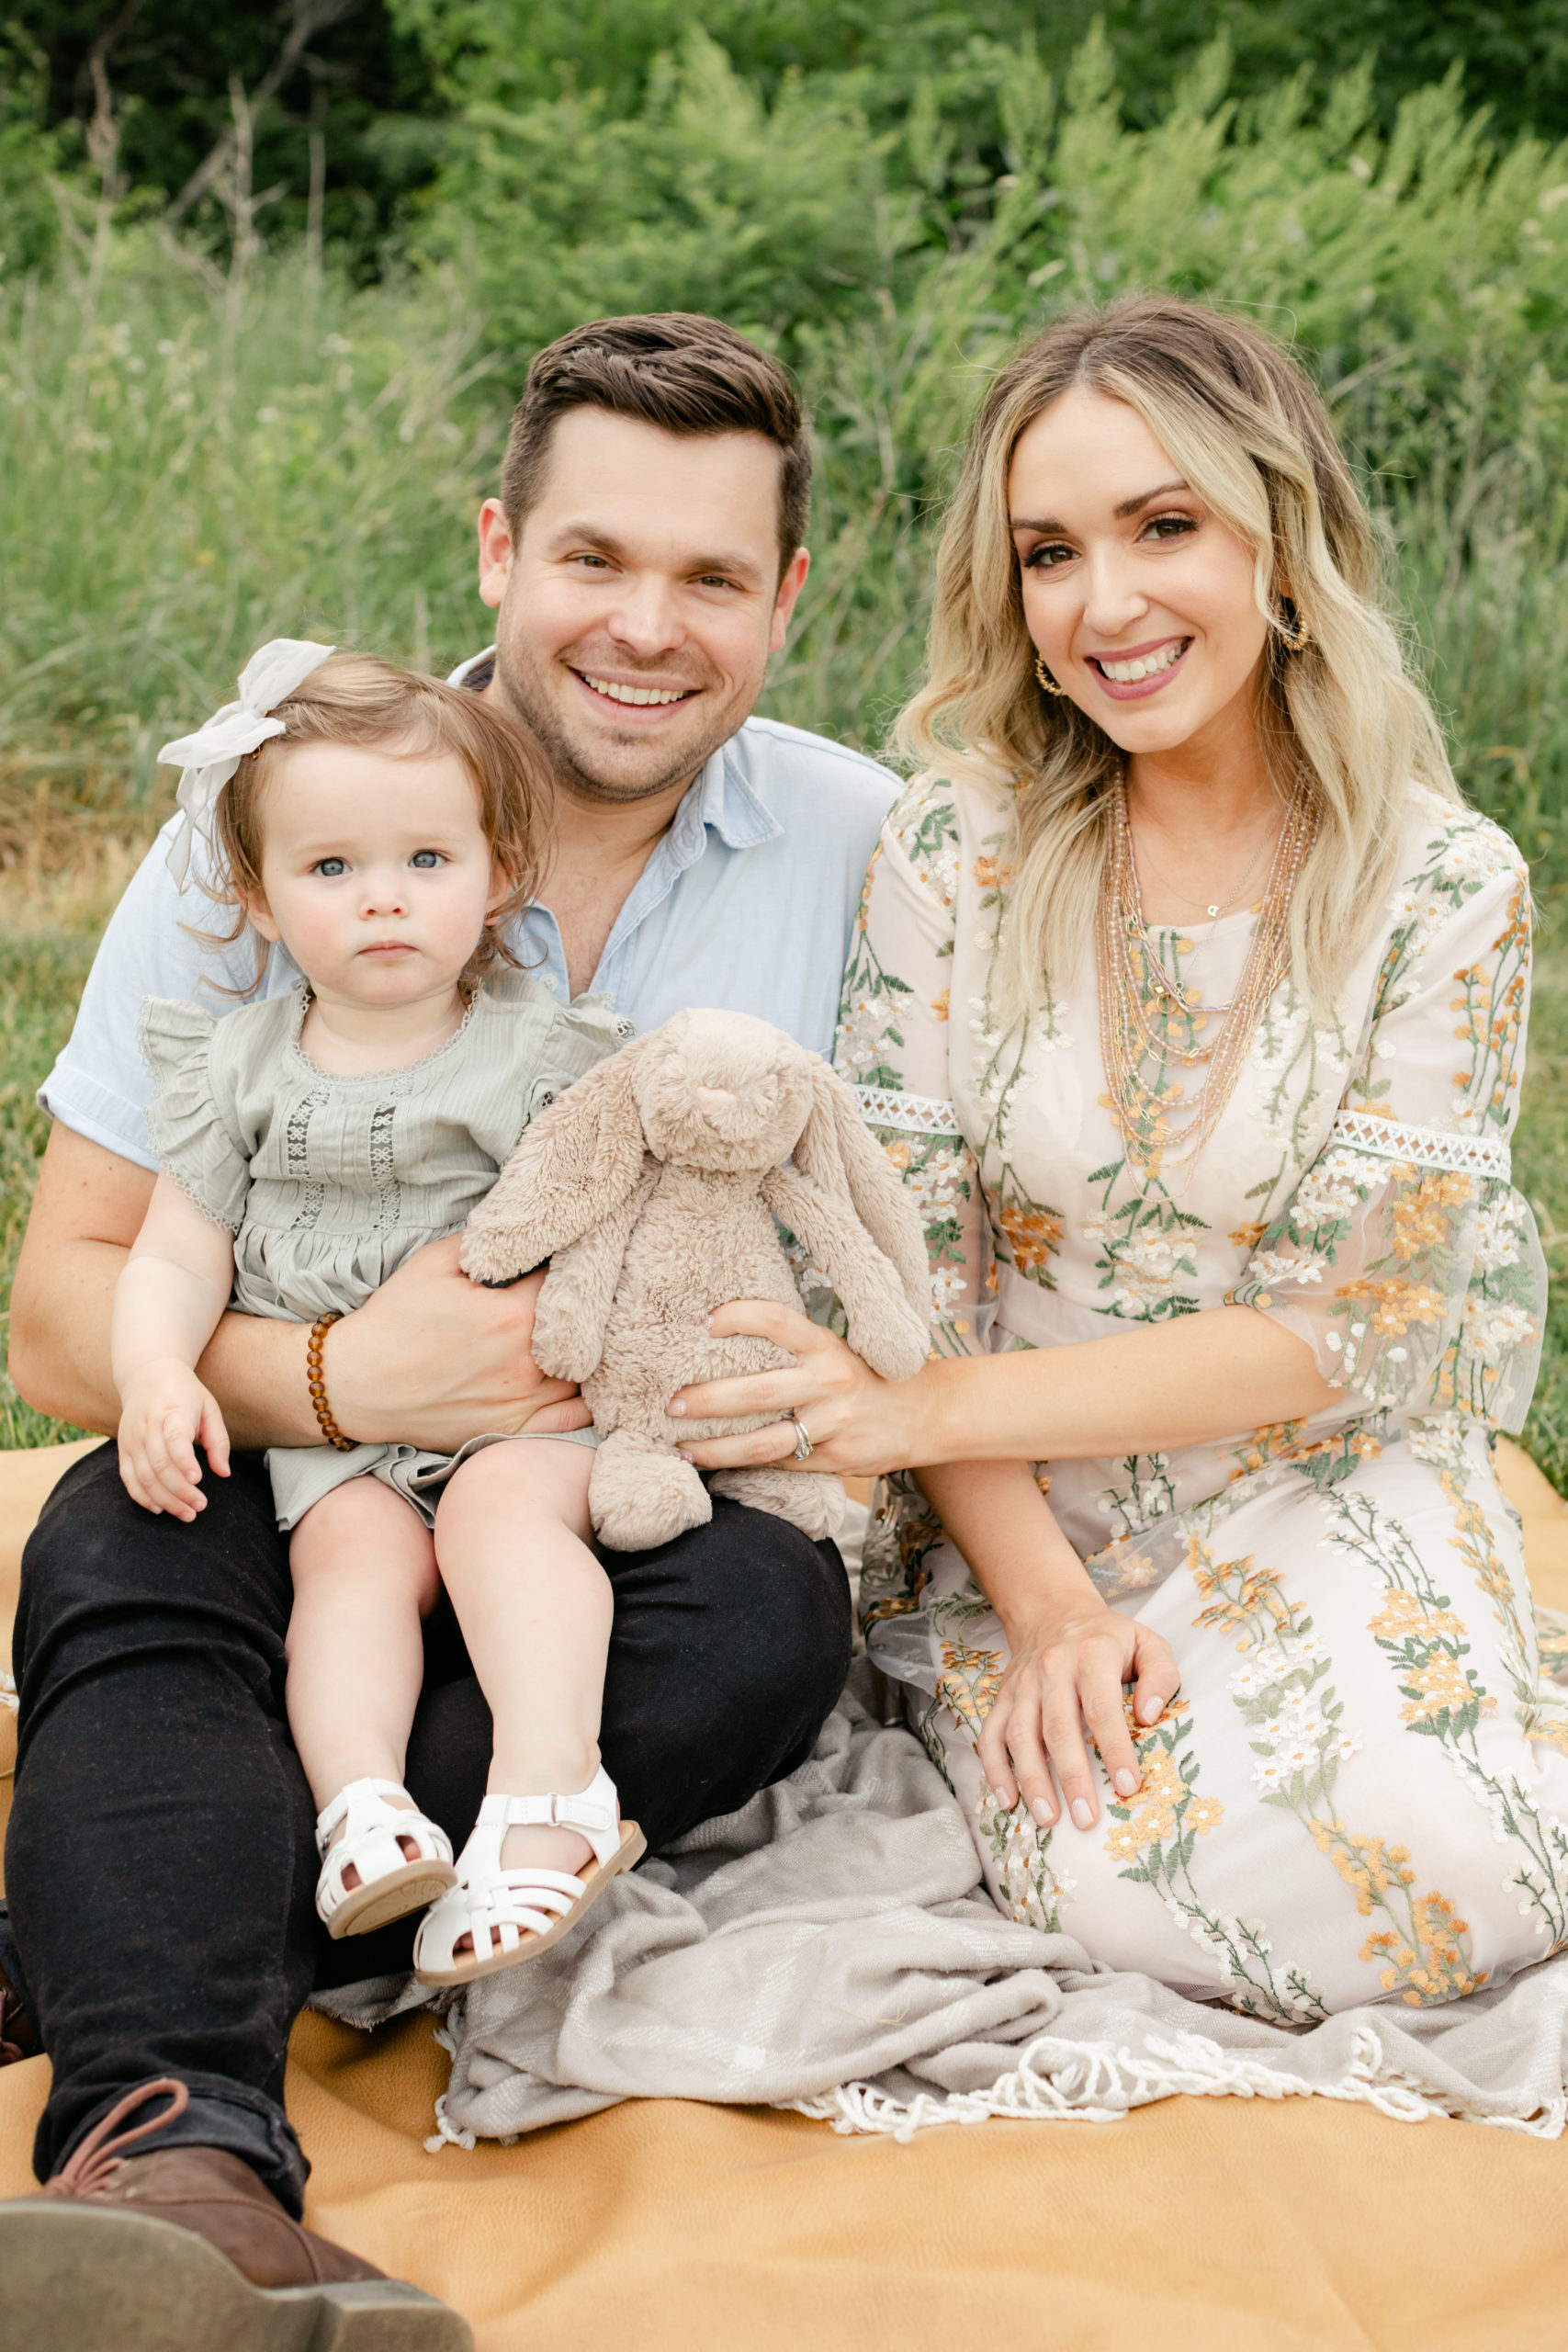 Outdoor photo of family of three. Mom, dad and their baby girl sitting on blanket on the grass. Family smiling towards camera. Mama wearing lace details floral embroidered maxi dress. Dad wearing black pants and light blue collar button up. Baby girl wearing white bow in hair and sage green dress holding her stuffed bunny.